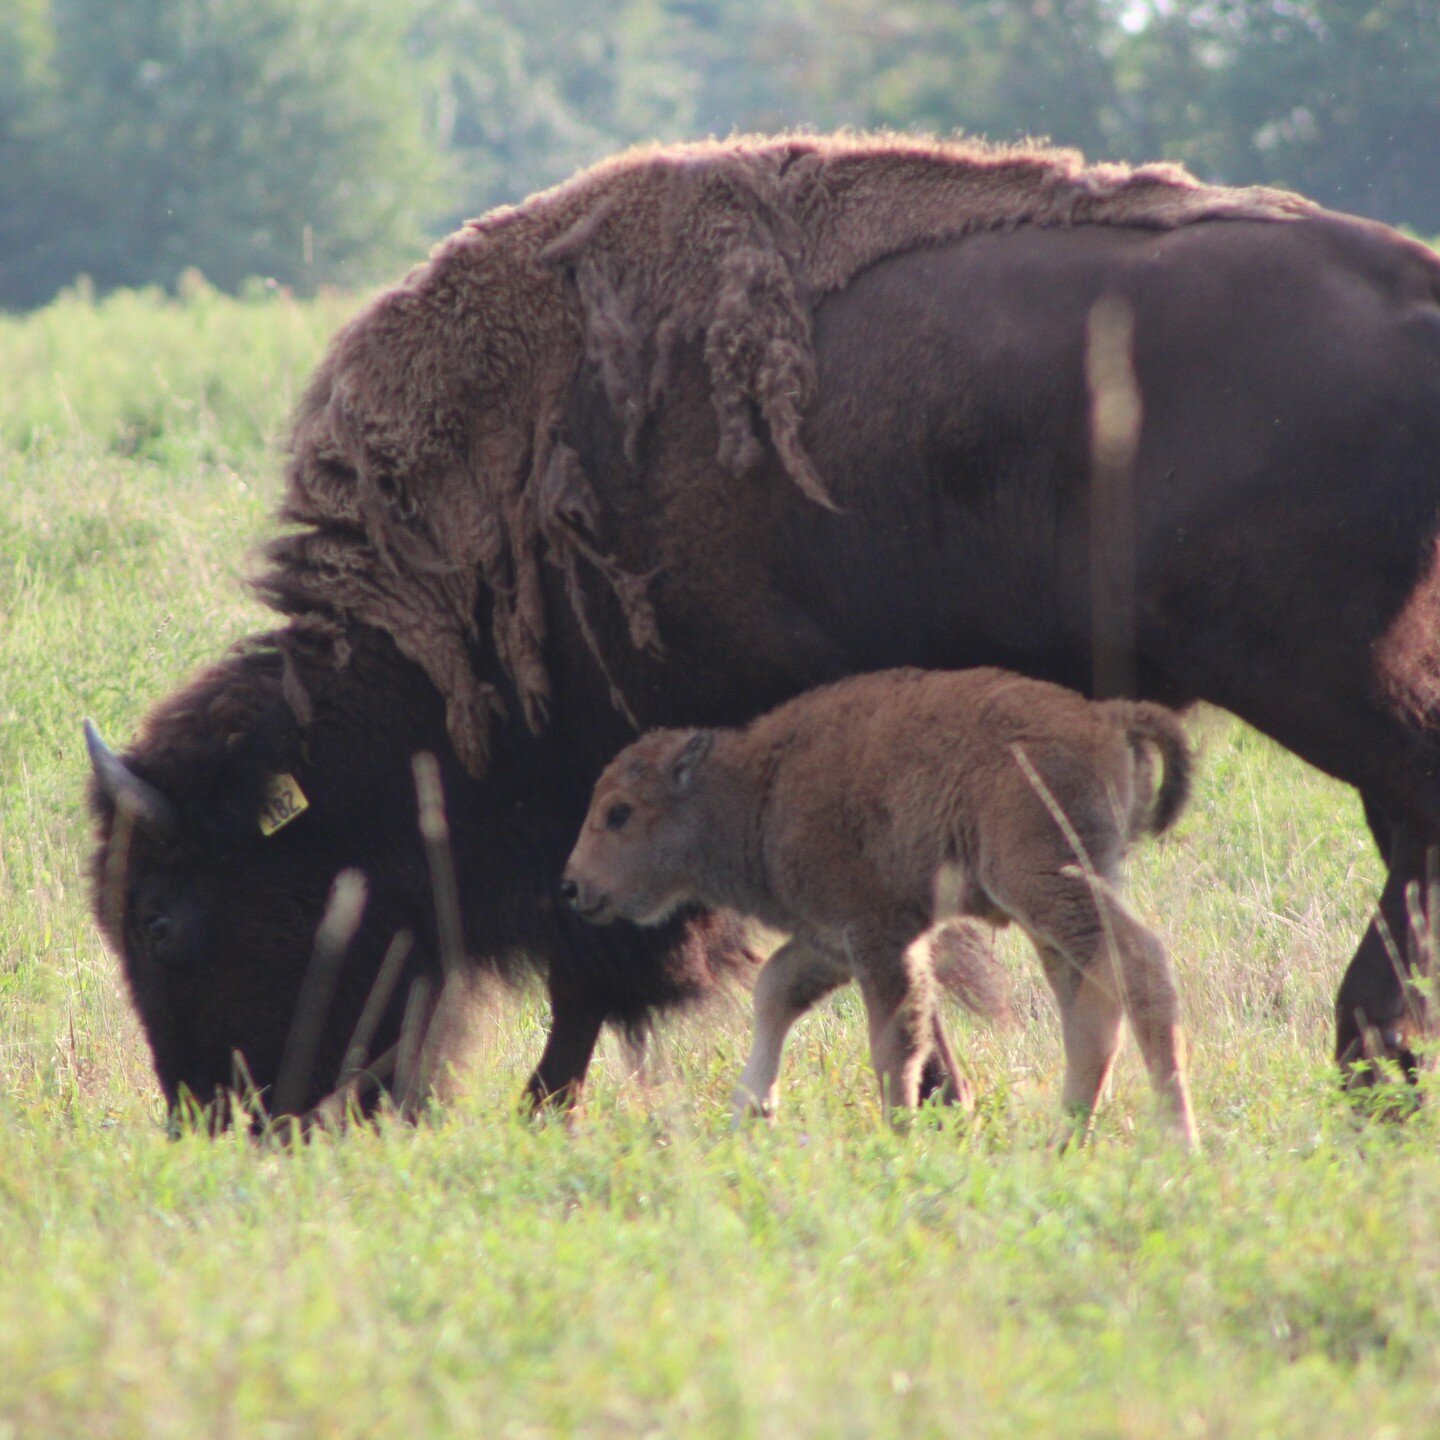 New arrival late last night. Mamma and little one are doing just fine, a first for all involved. 
#americanbison#bisoncalf#bison#farmlifebestlife#millersburgpa